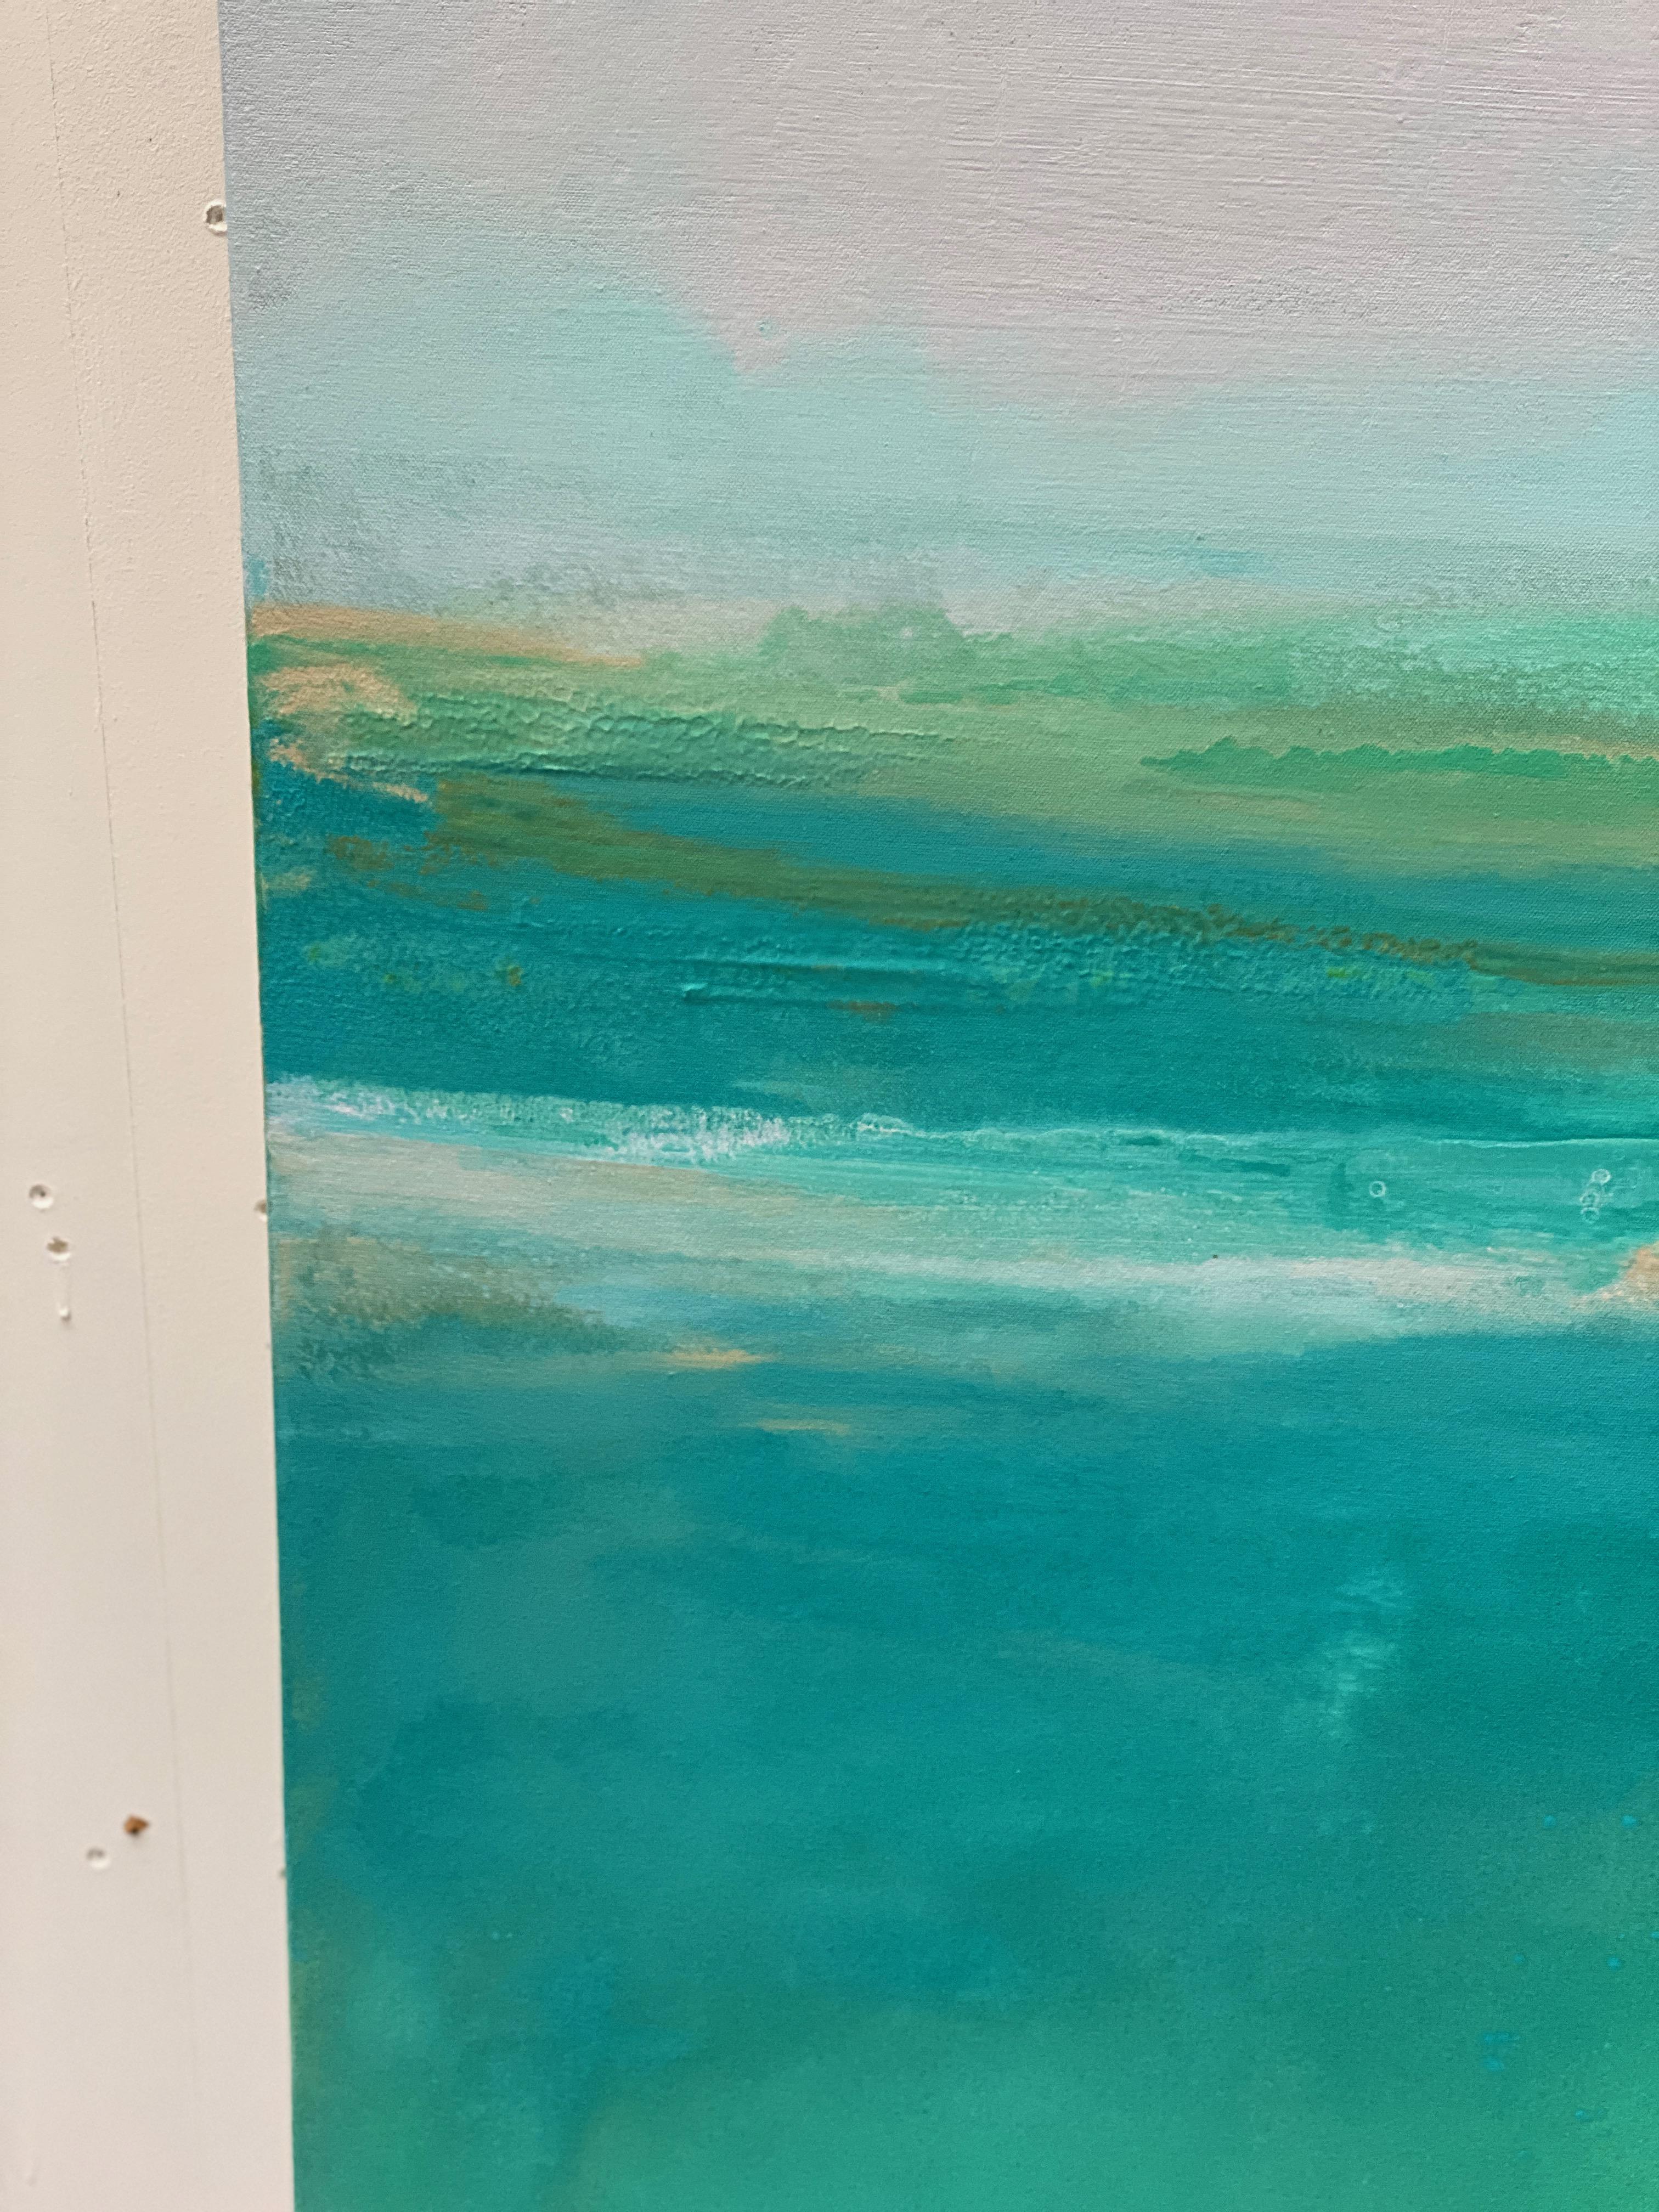 'Rest' Present Moment Collection

Emanating light, energy and movement, this is large dynamic minimalist abstract is painted in colours of calm green, pastel blue, gold, mist and white. Layered paint reveal descriptive textures, delicate details,